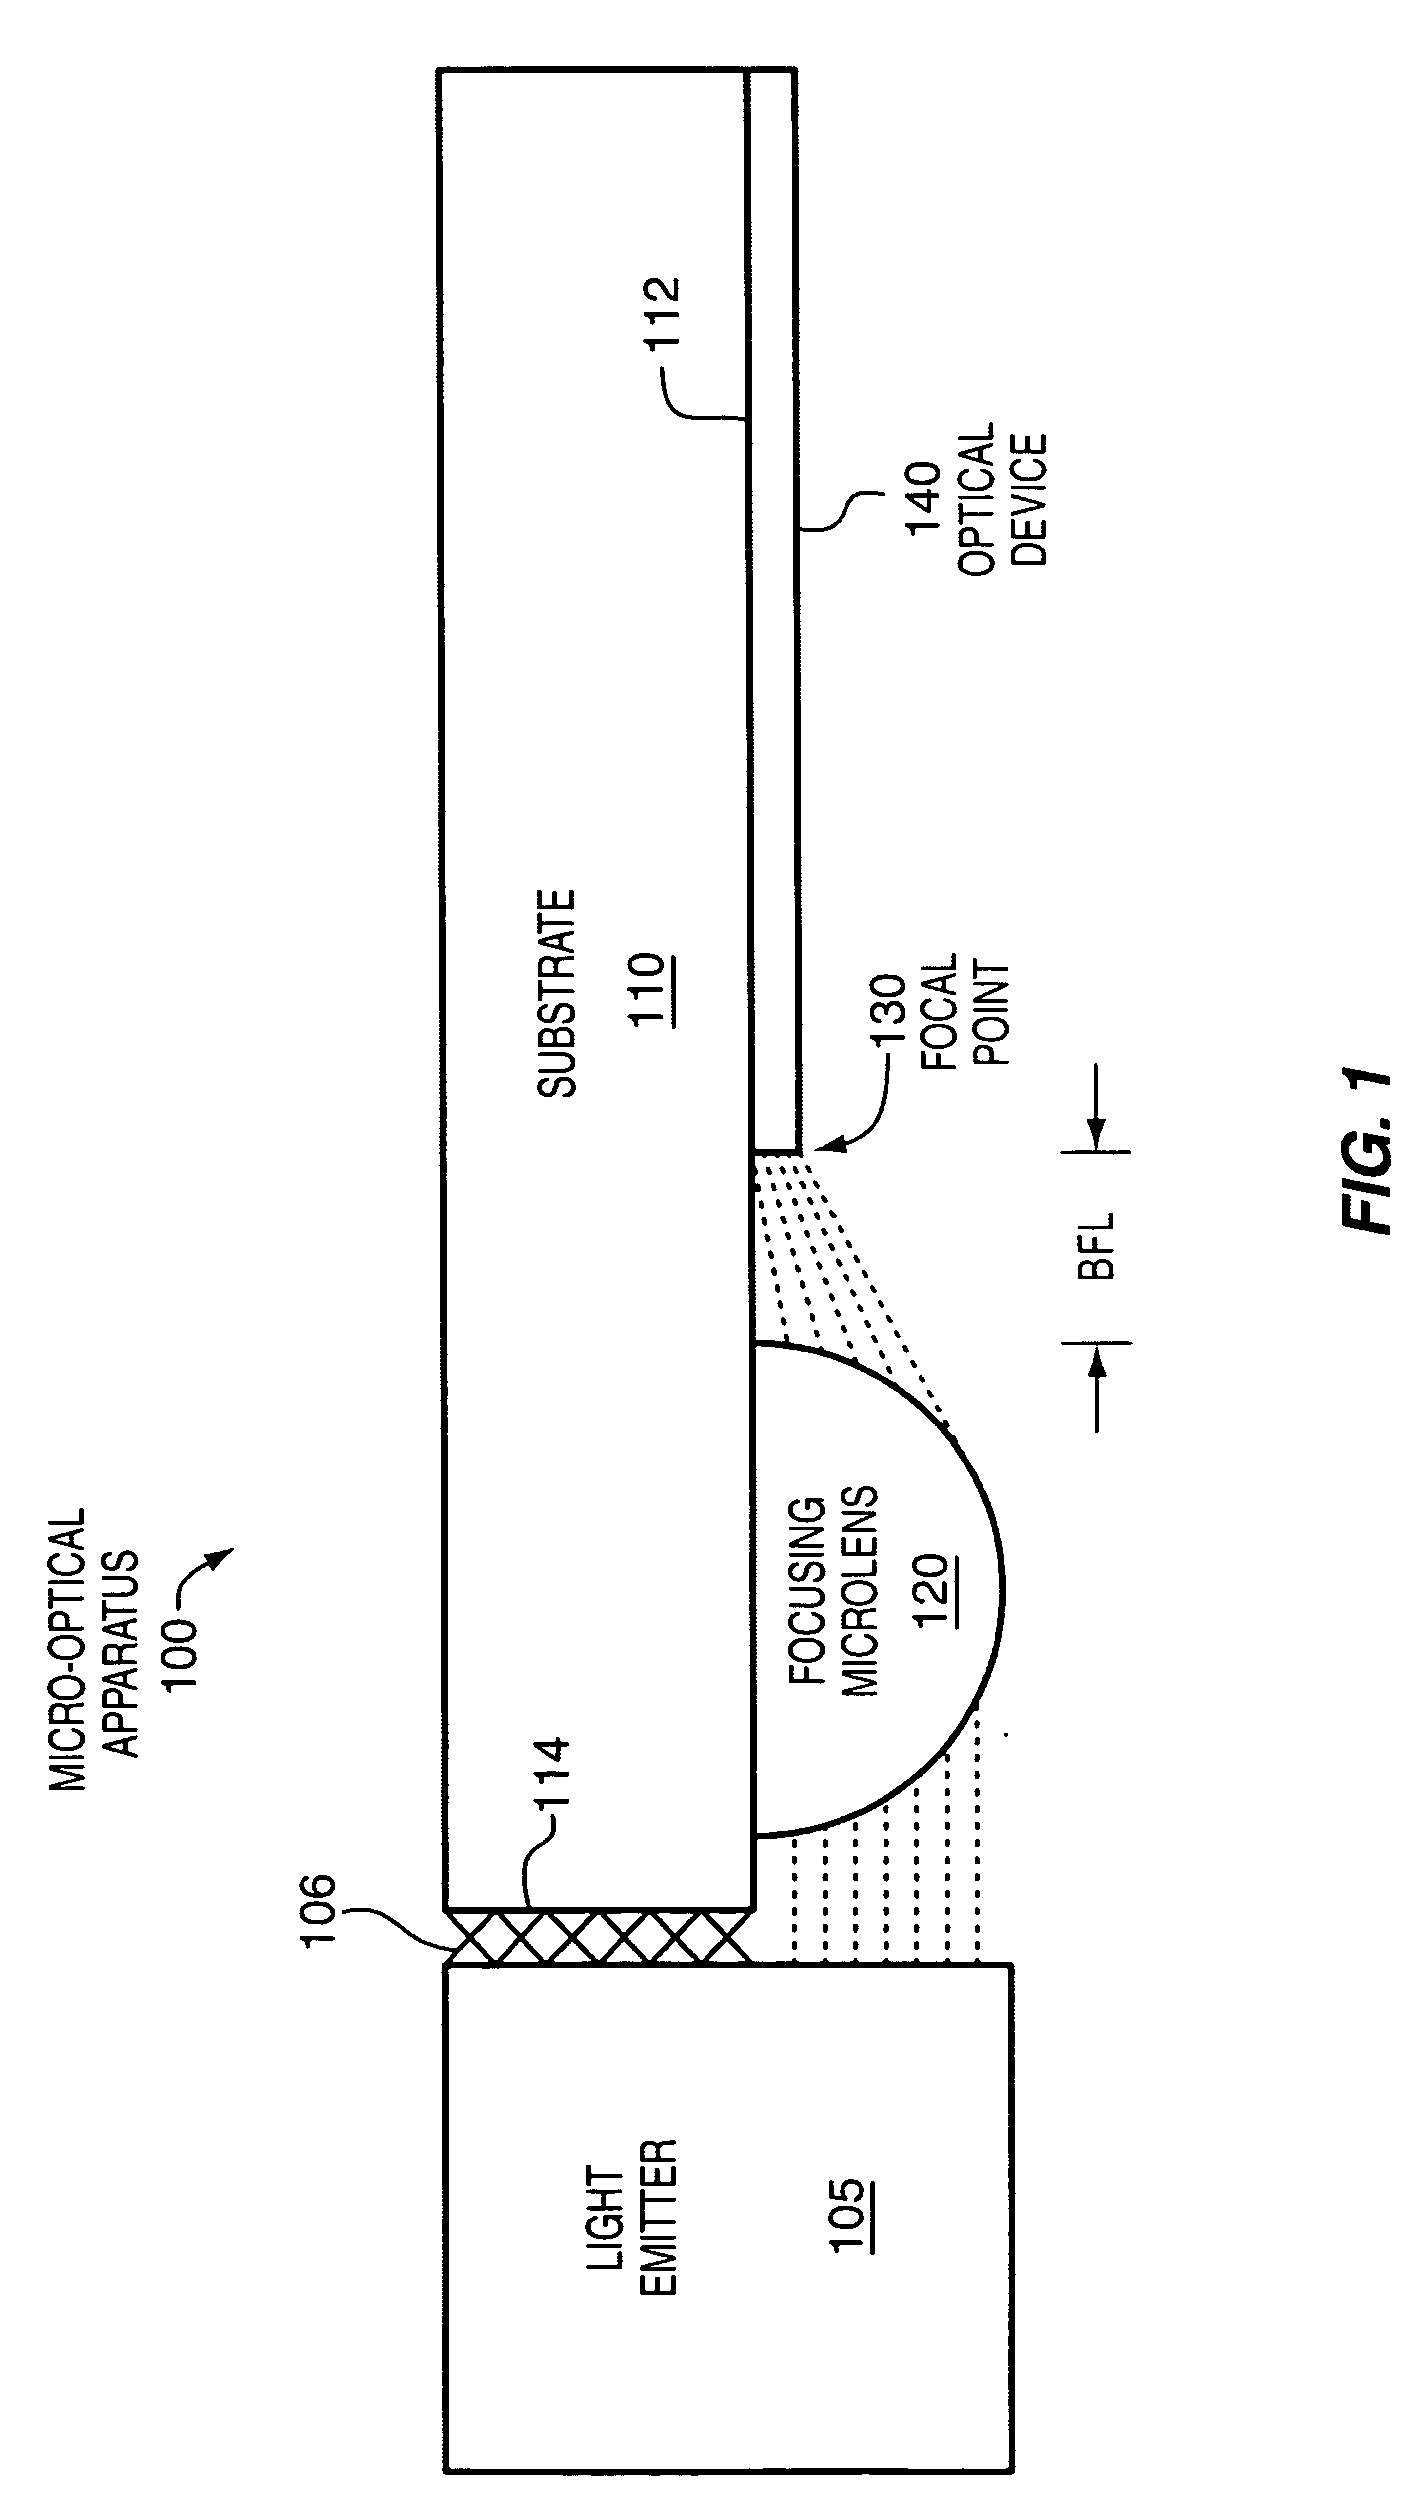 On-substrate microlens to couple an off-substrate light emitter and/or receiver with an on-substrate optical device